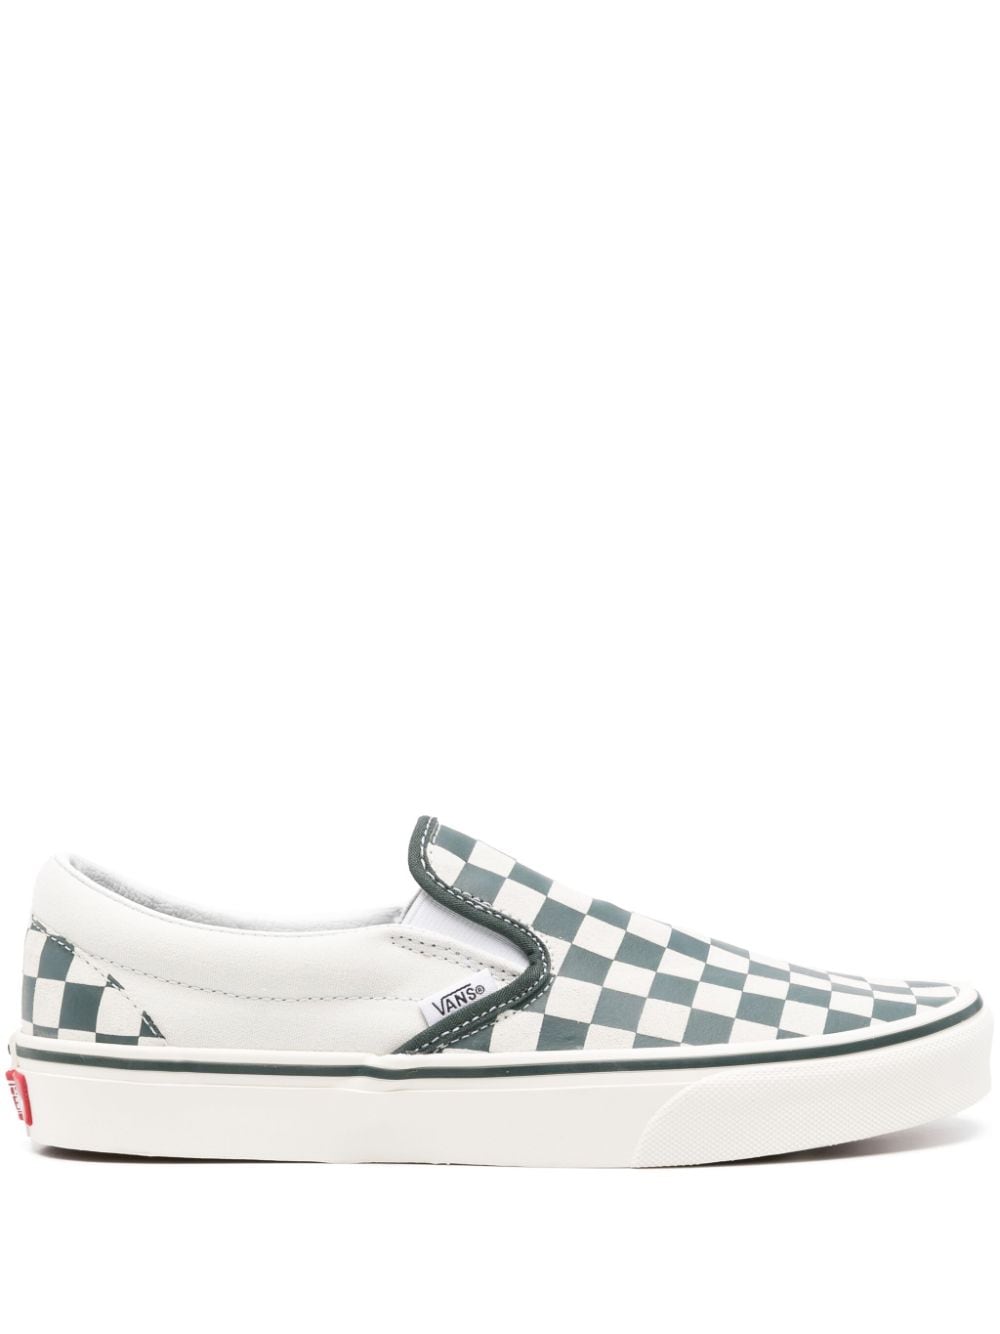 Classic Checkerboard slip-on sneakers<BR/><BR/>